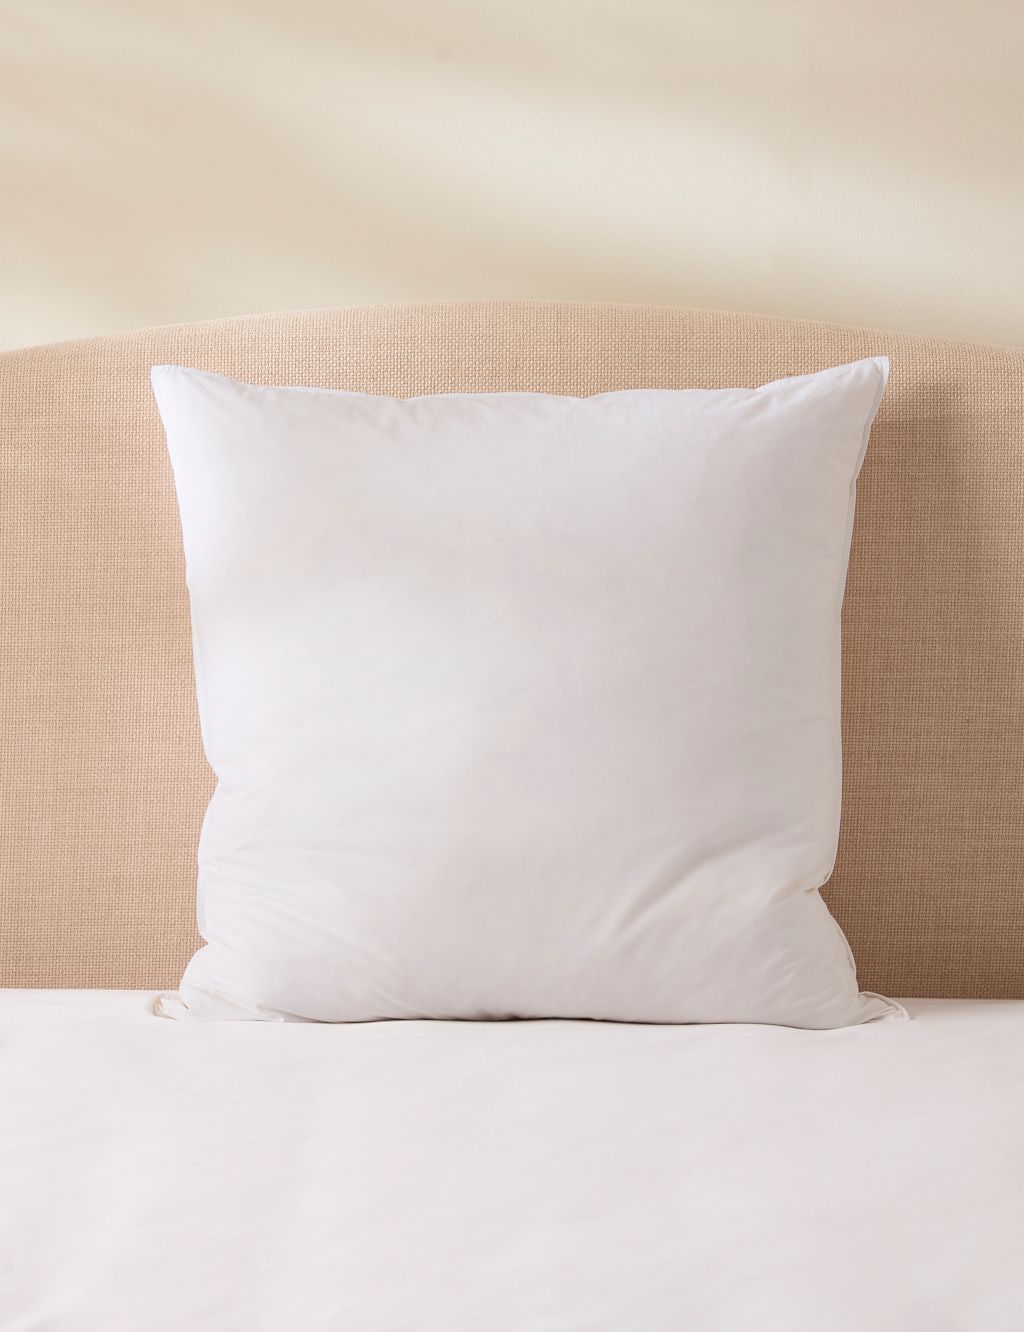 Duck Feather and Down Square Pillow image 3